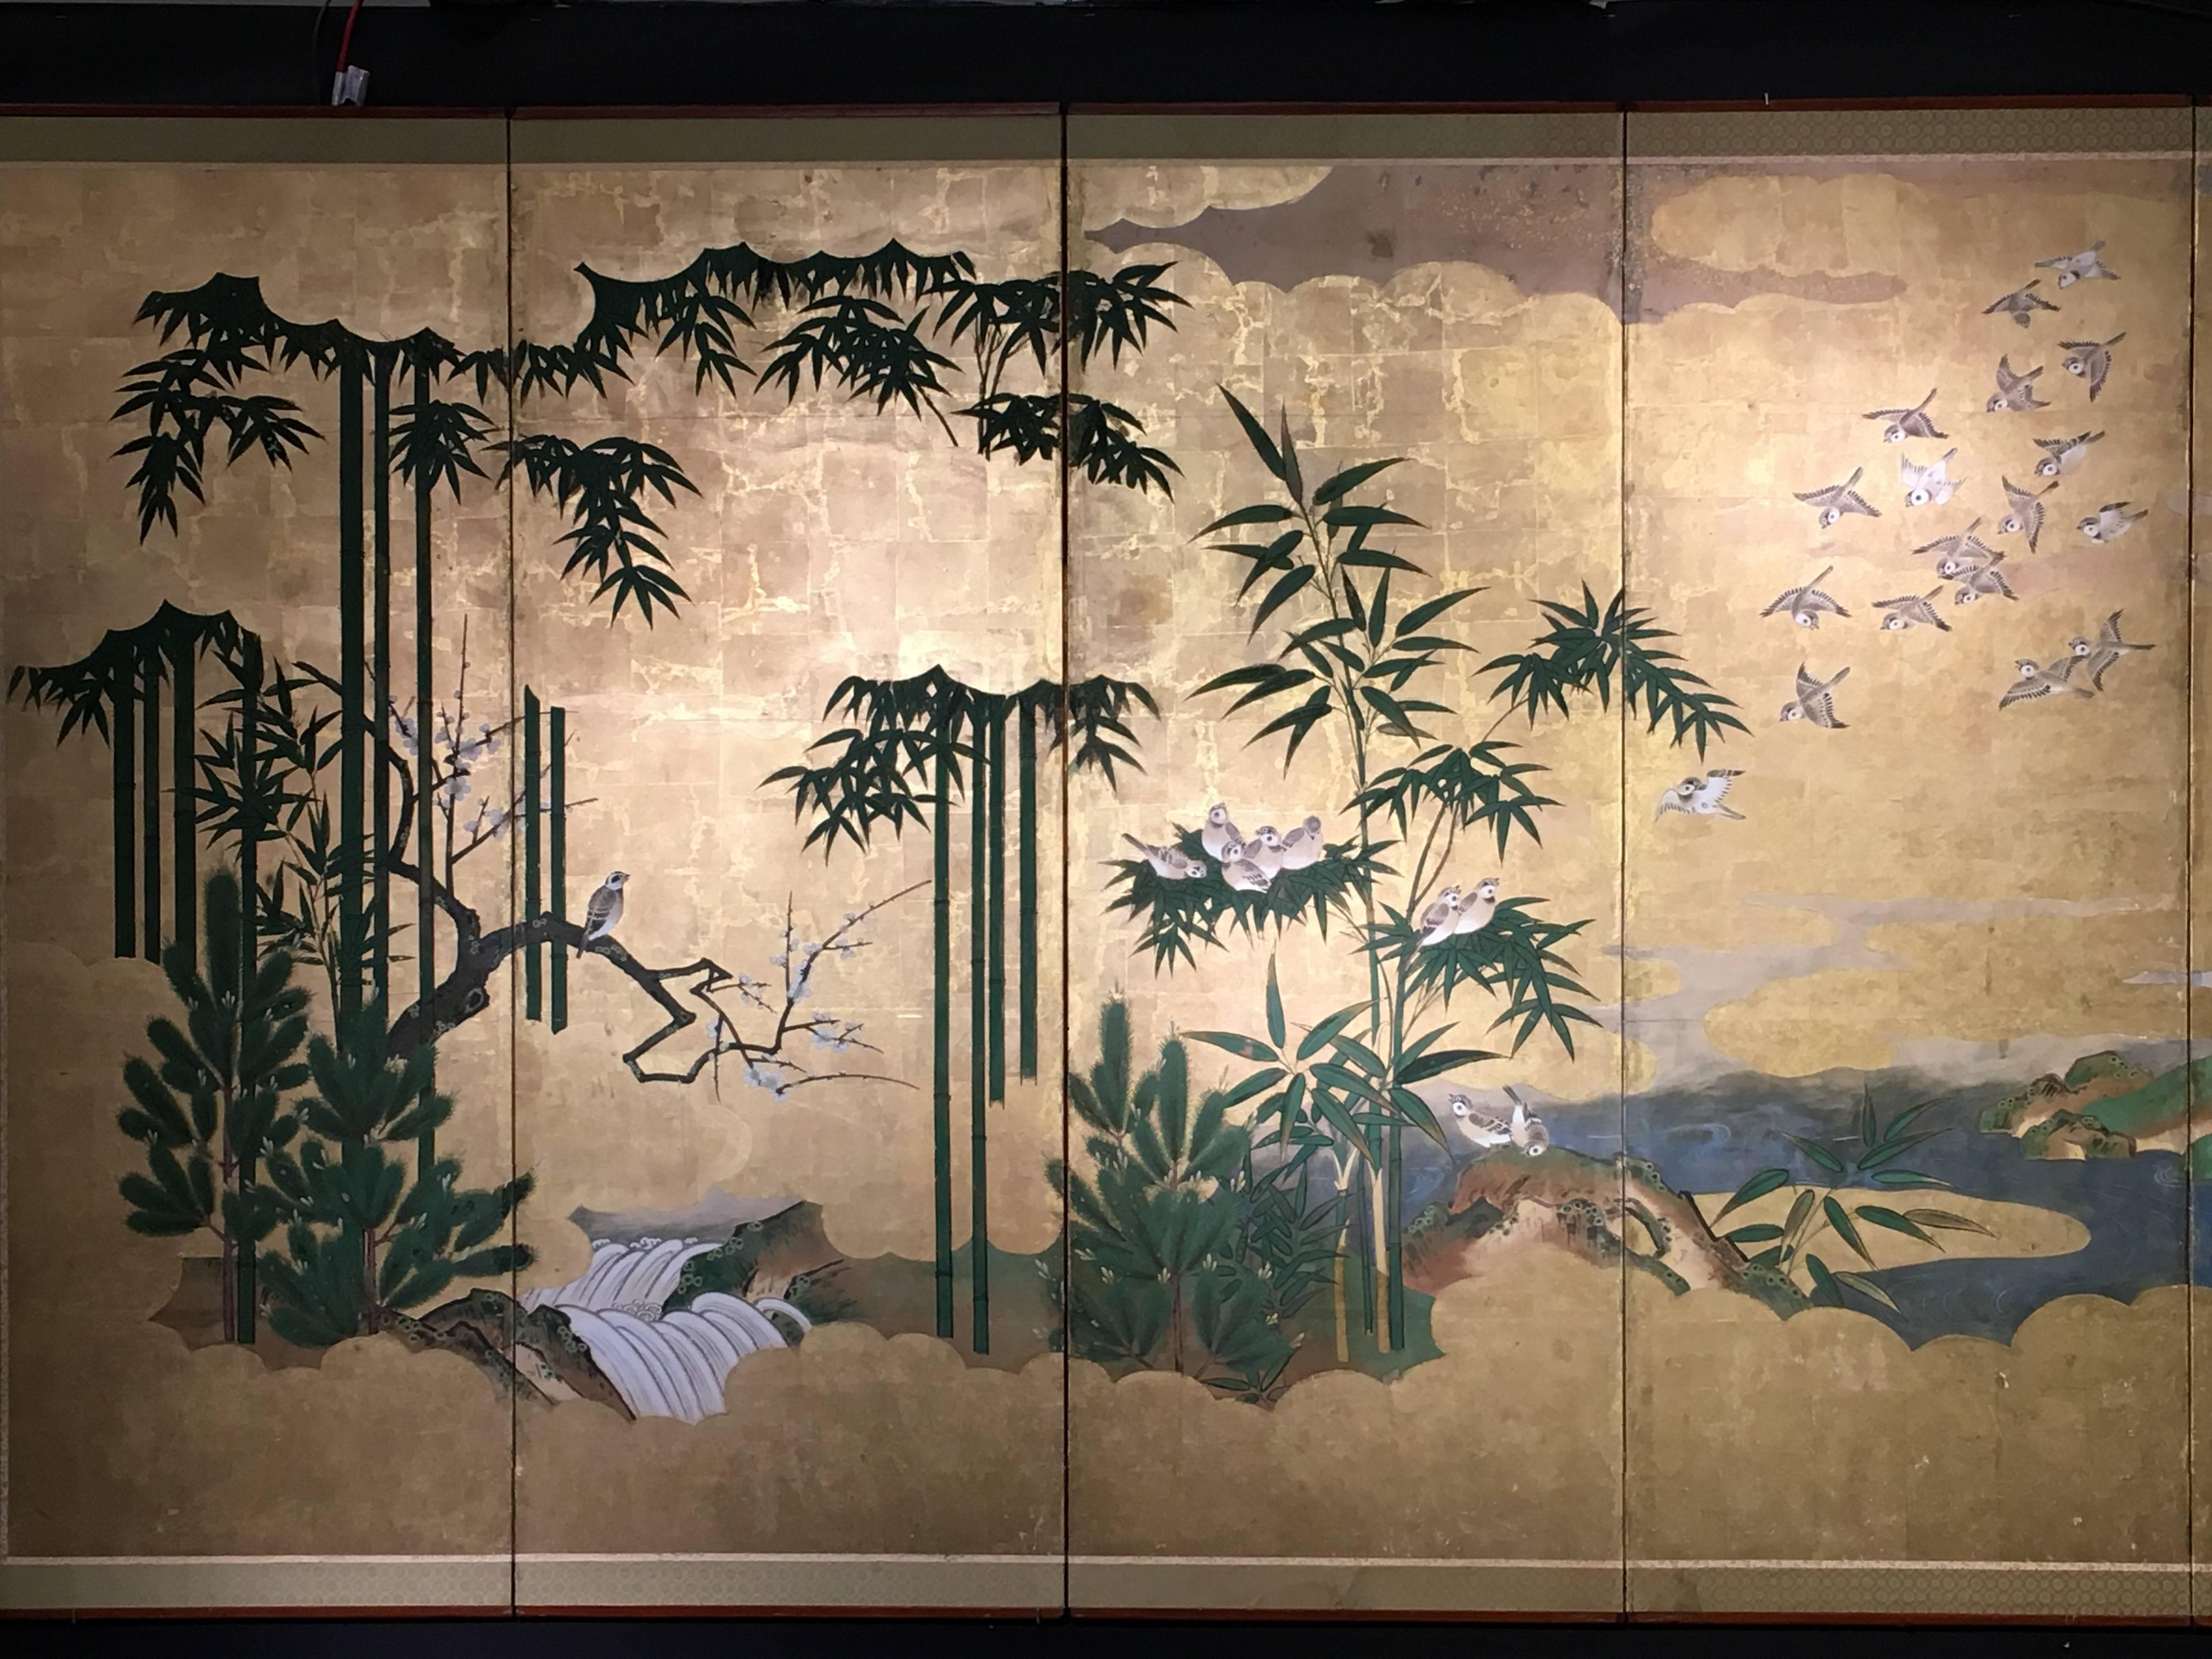 A beautiful and elegant Japanese Edo period six-panel painted screen, byobu, 18th-19th century. The screen featuring a flock of sparrows descending from billowing golden clouds to roost in a bamboo grove. A rushing white water stream flows through